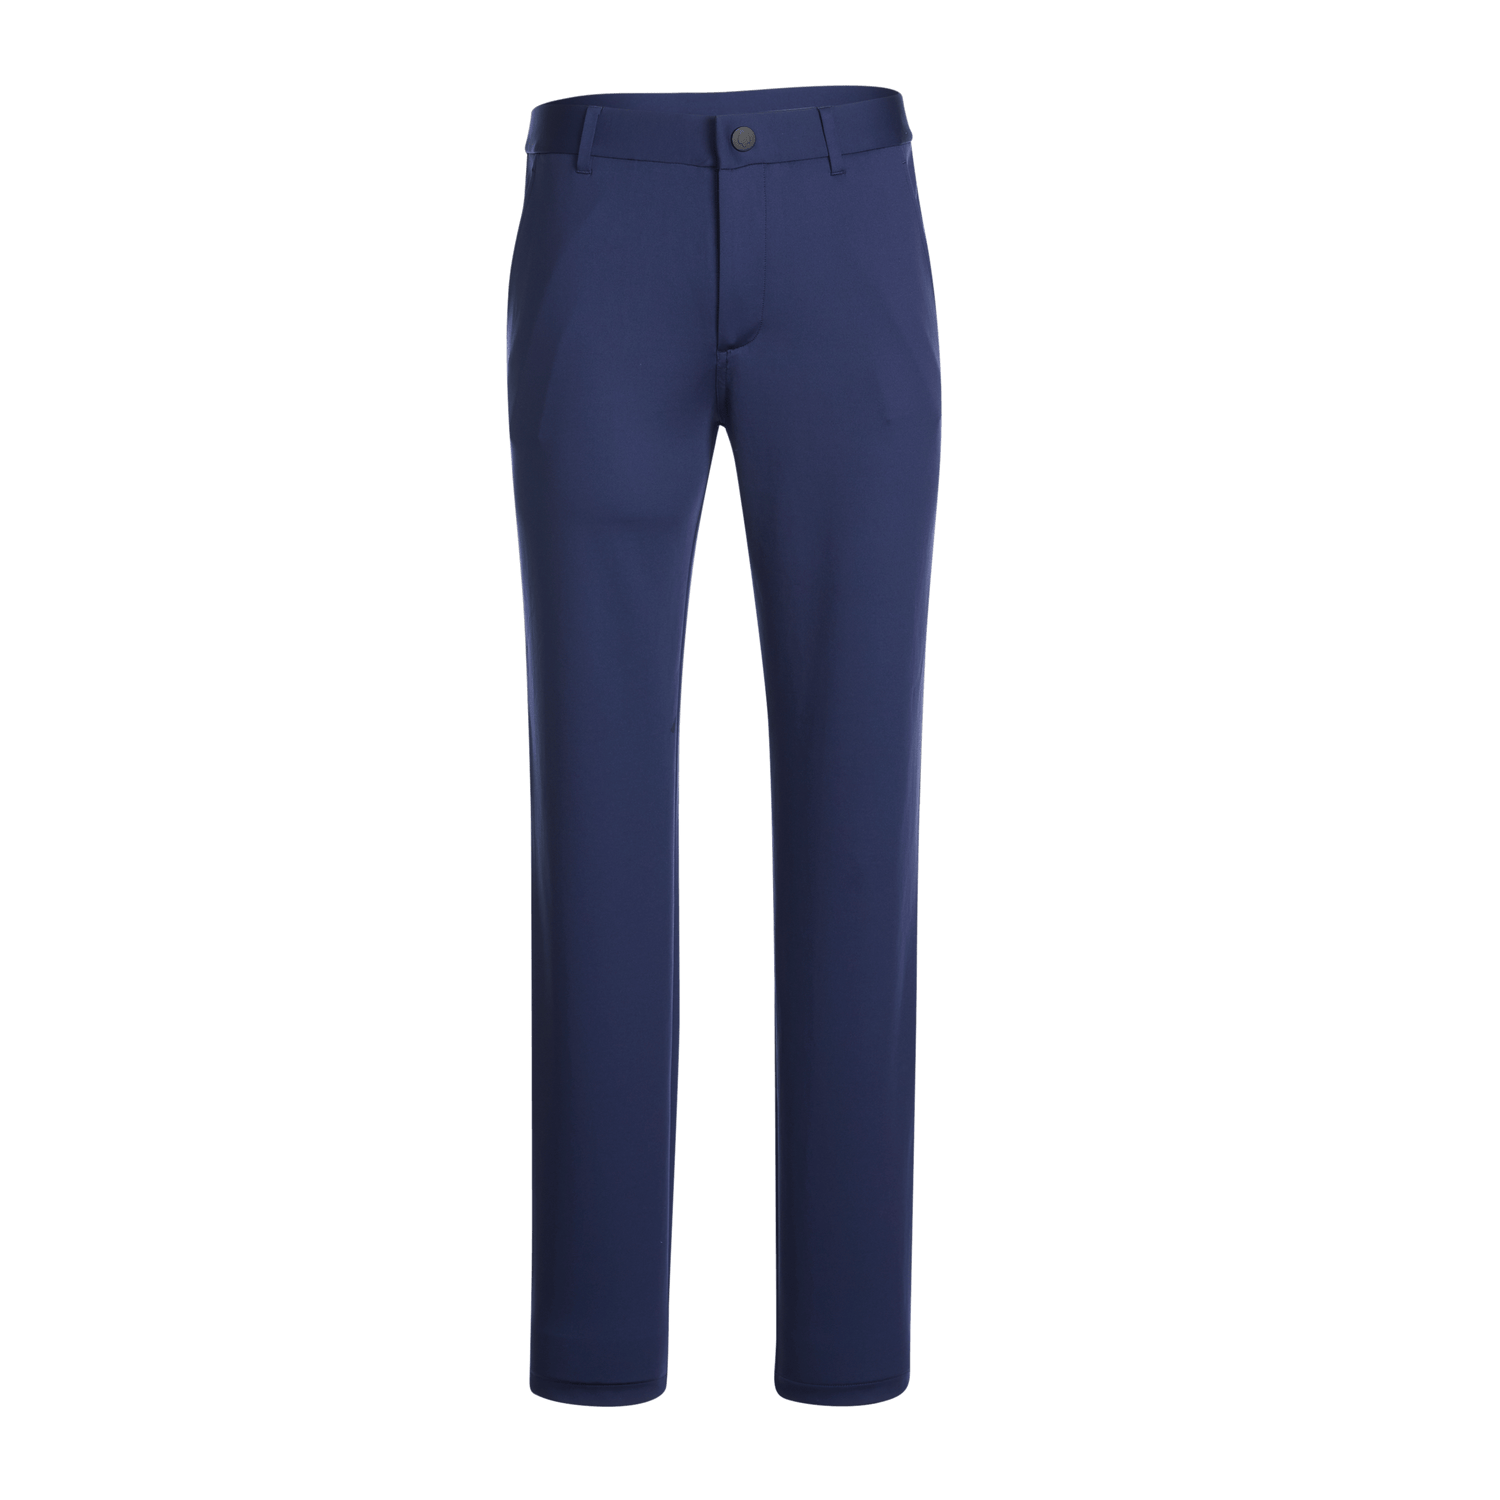 Sequoia Trouser Child Products